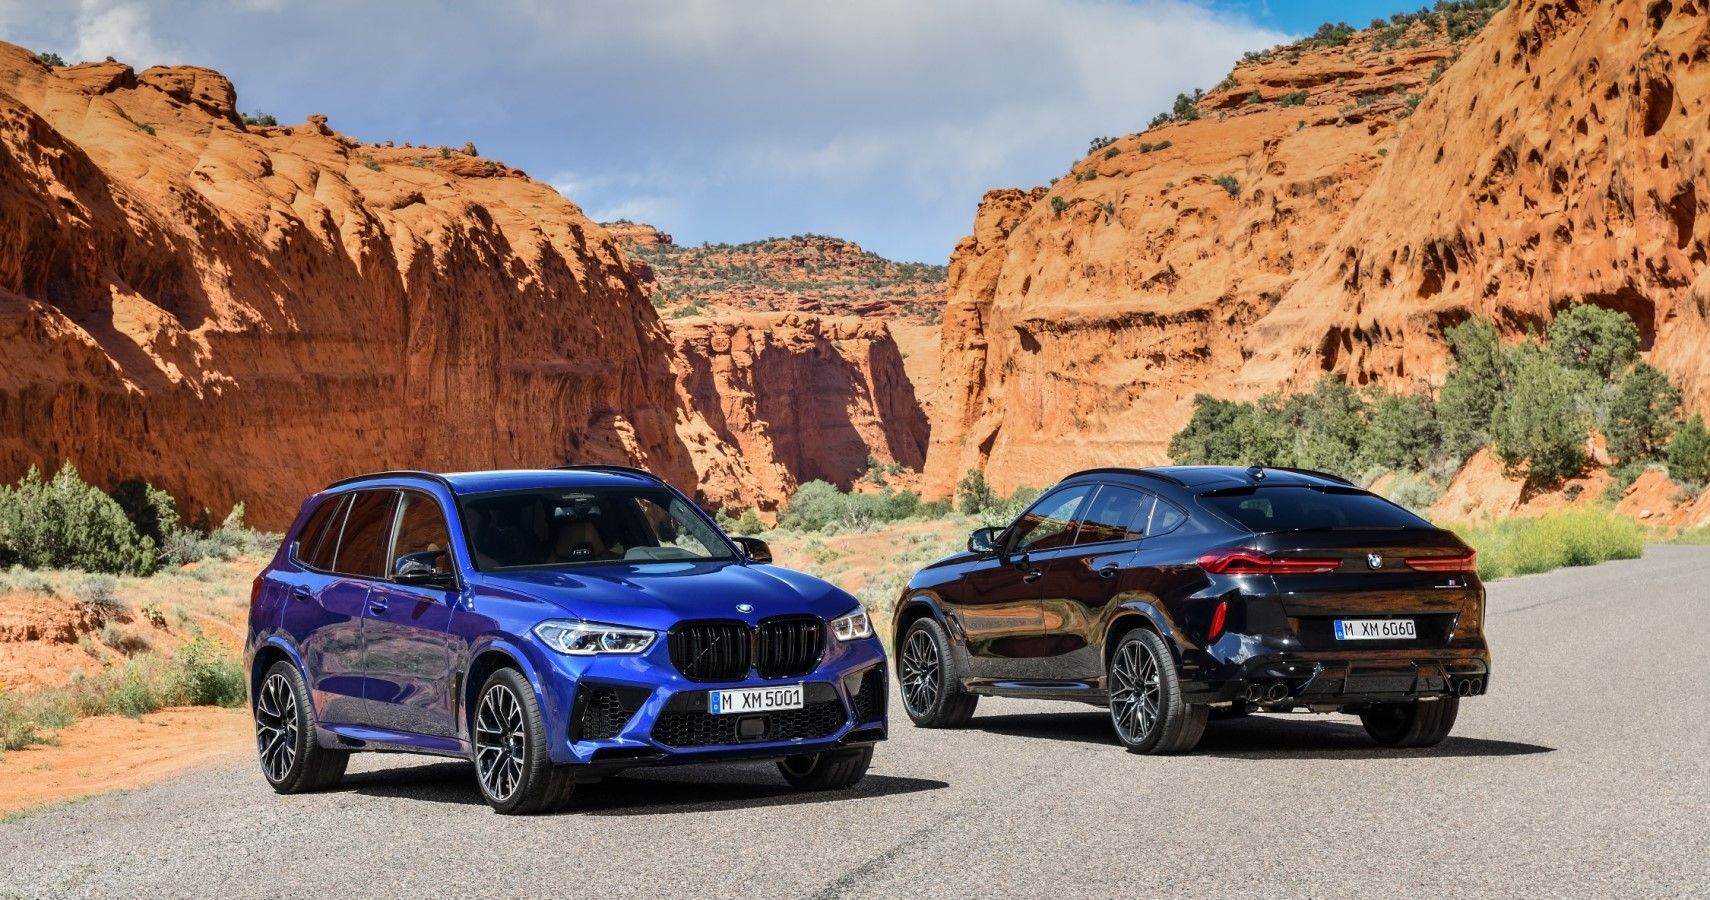 BMW X5 M and X5 M coupe front and rear view